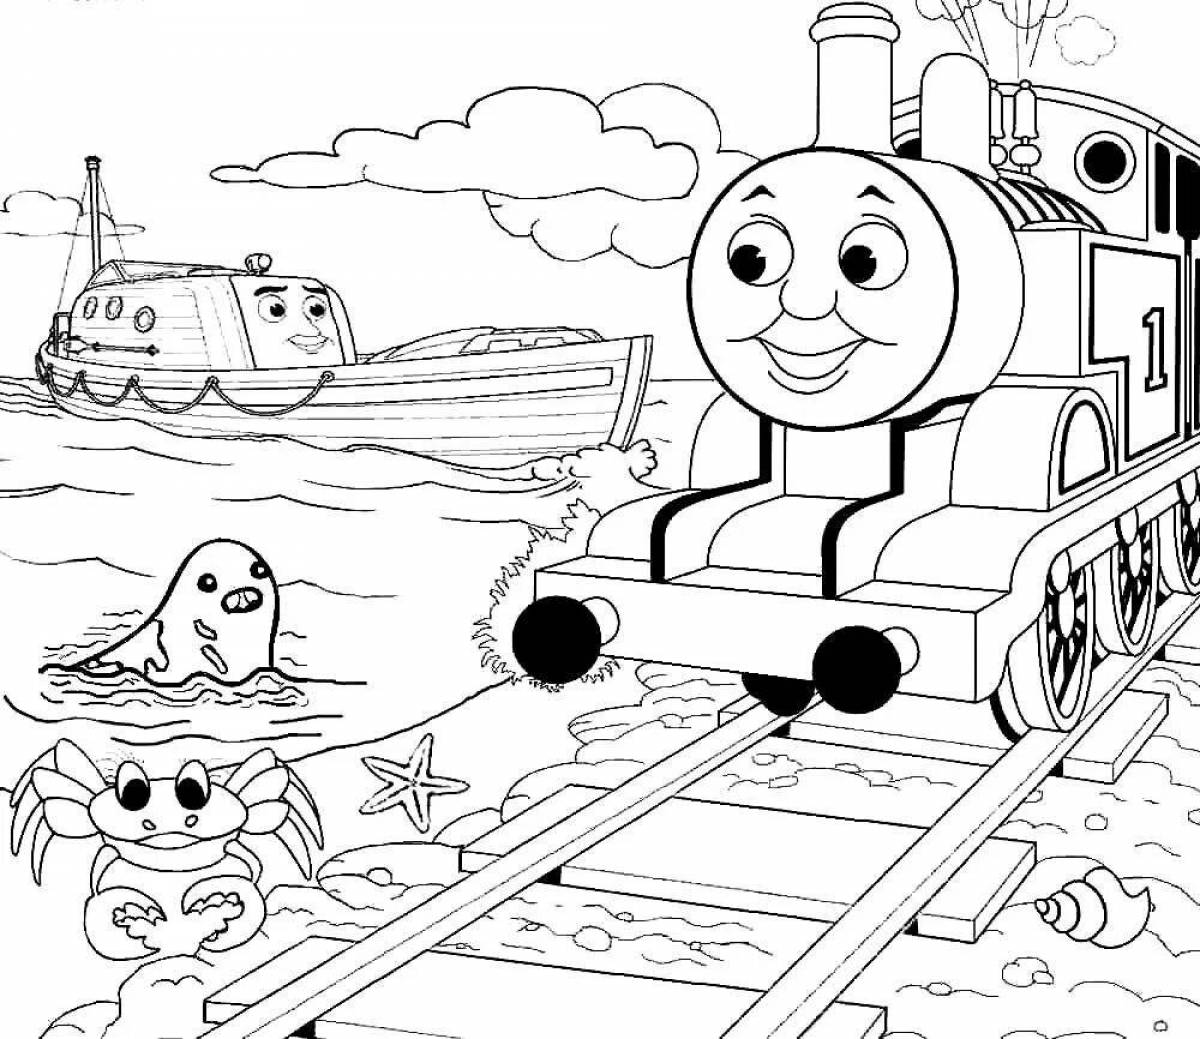 Cute thomas the tank engine coloring book for kids